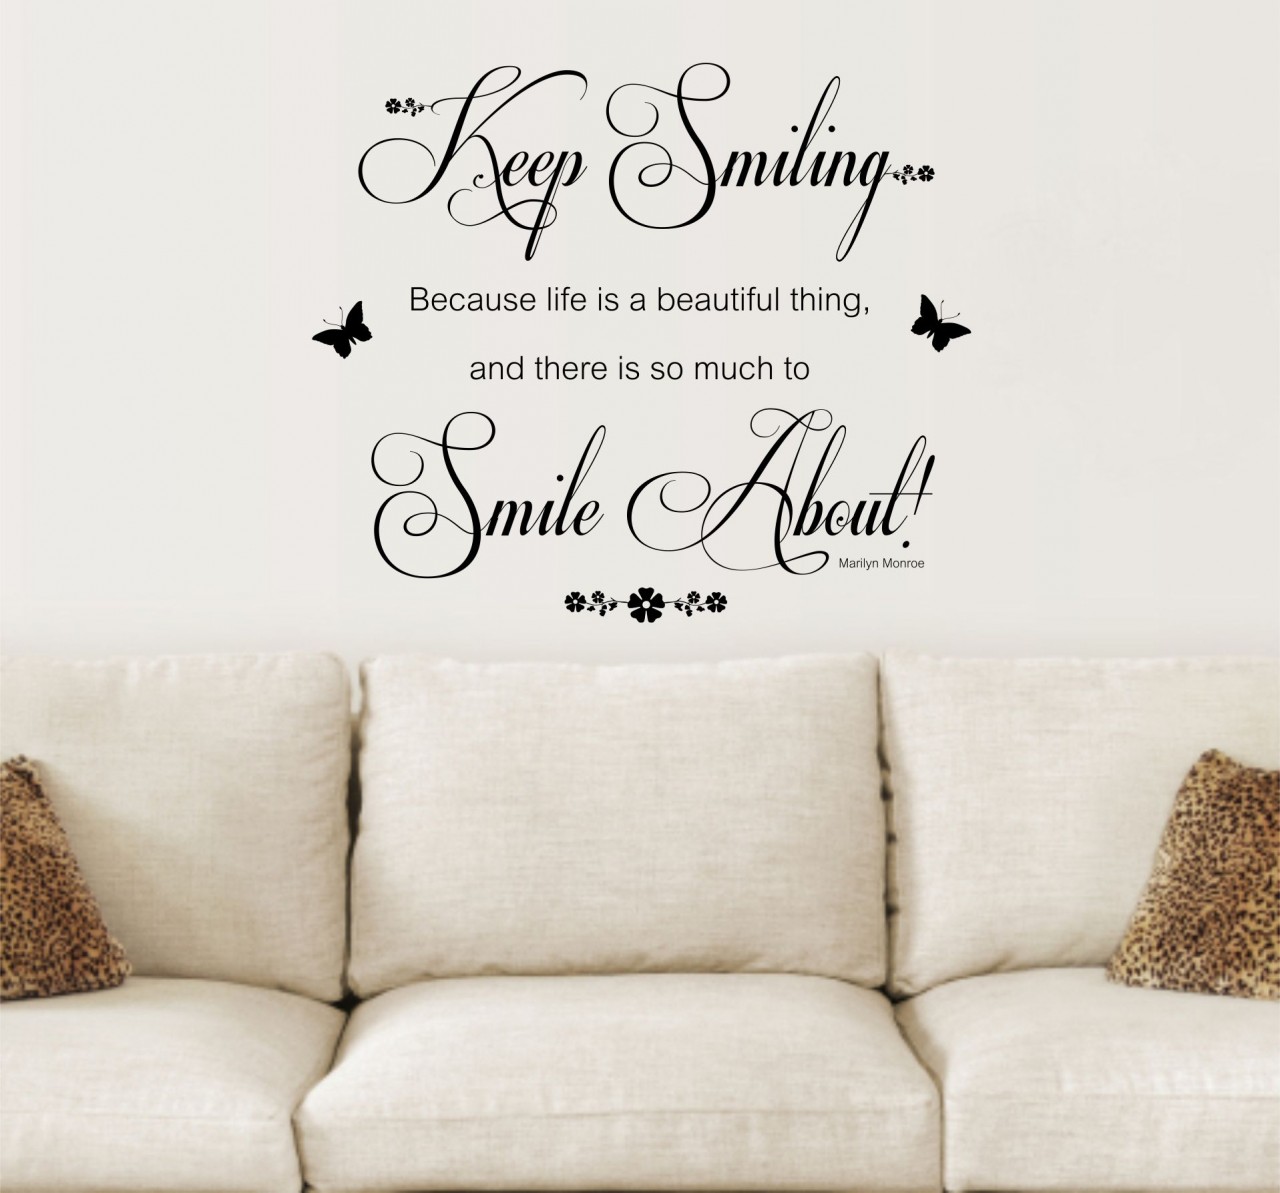 Smile The Most Beautiful Wall Sticker Home Quotes Inspirational Love MS254VC 